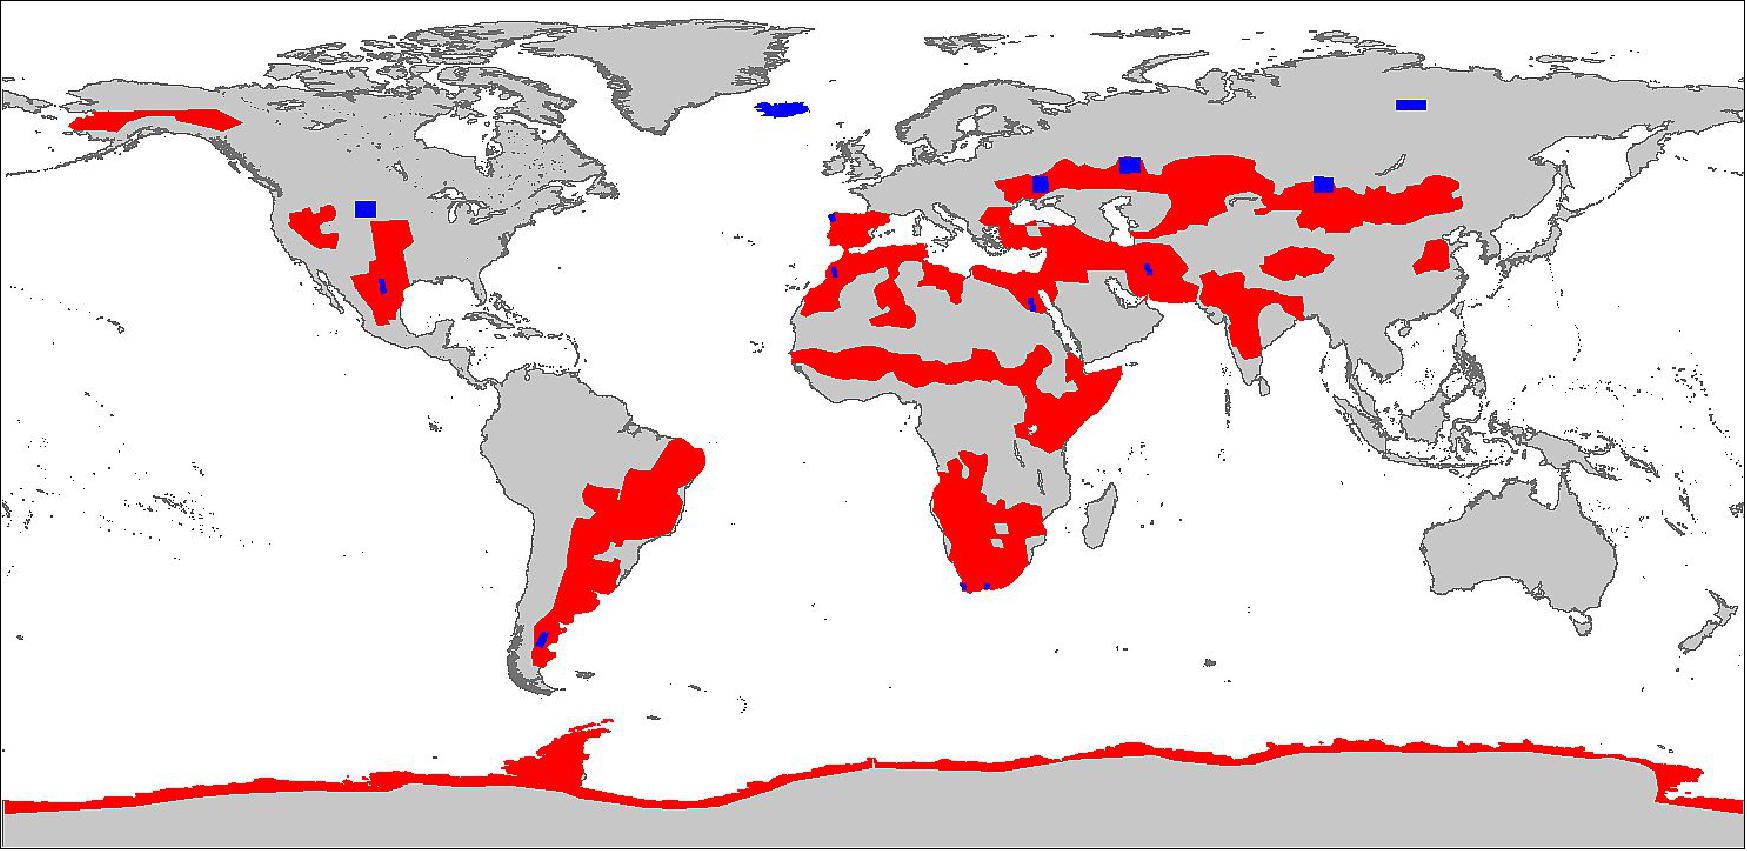 Figure 47: Regions of interest for high resolution acquisitions from 2016. In red the "preparation-areas" which are planned only once, in blue the "demo-areas" which will be acquired three to four times (image credit: DLR)